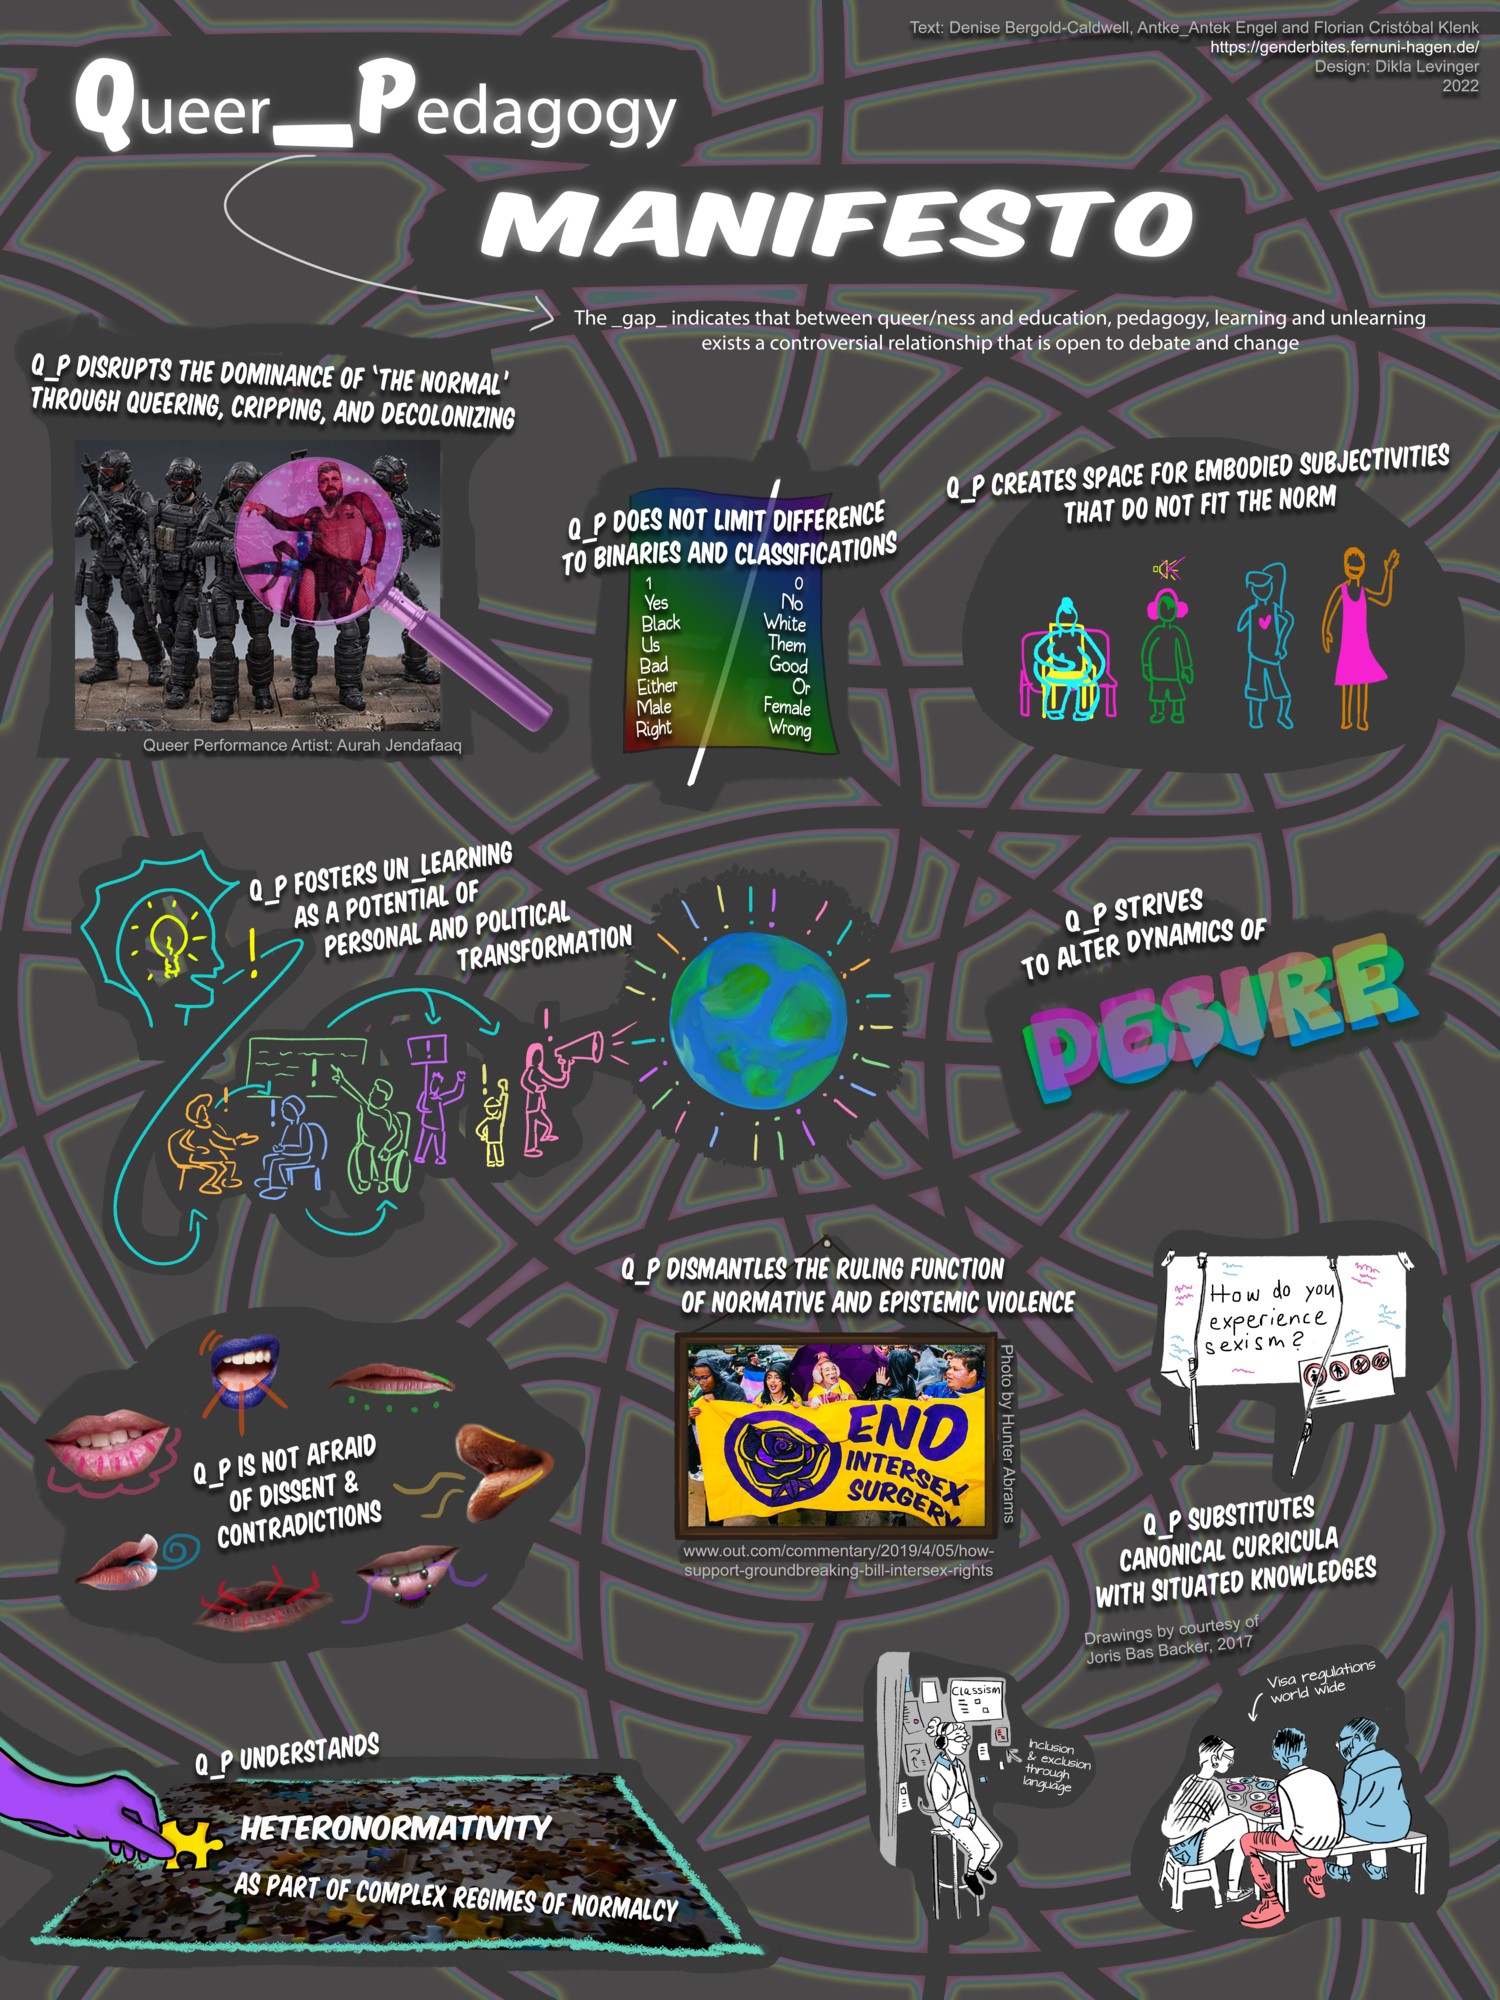 poster presenting the 11 statements of the Queer_pedagogy Manifesto combined with colorful graphic illustrations. The background is grey and connects the elements through a net structure 